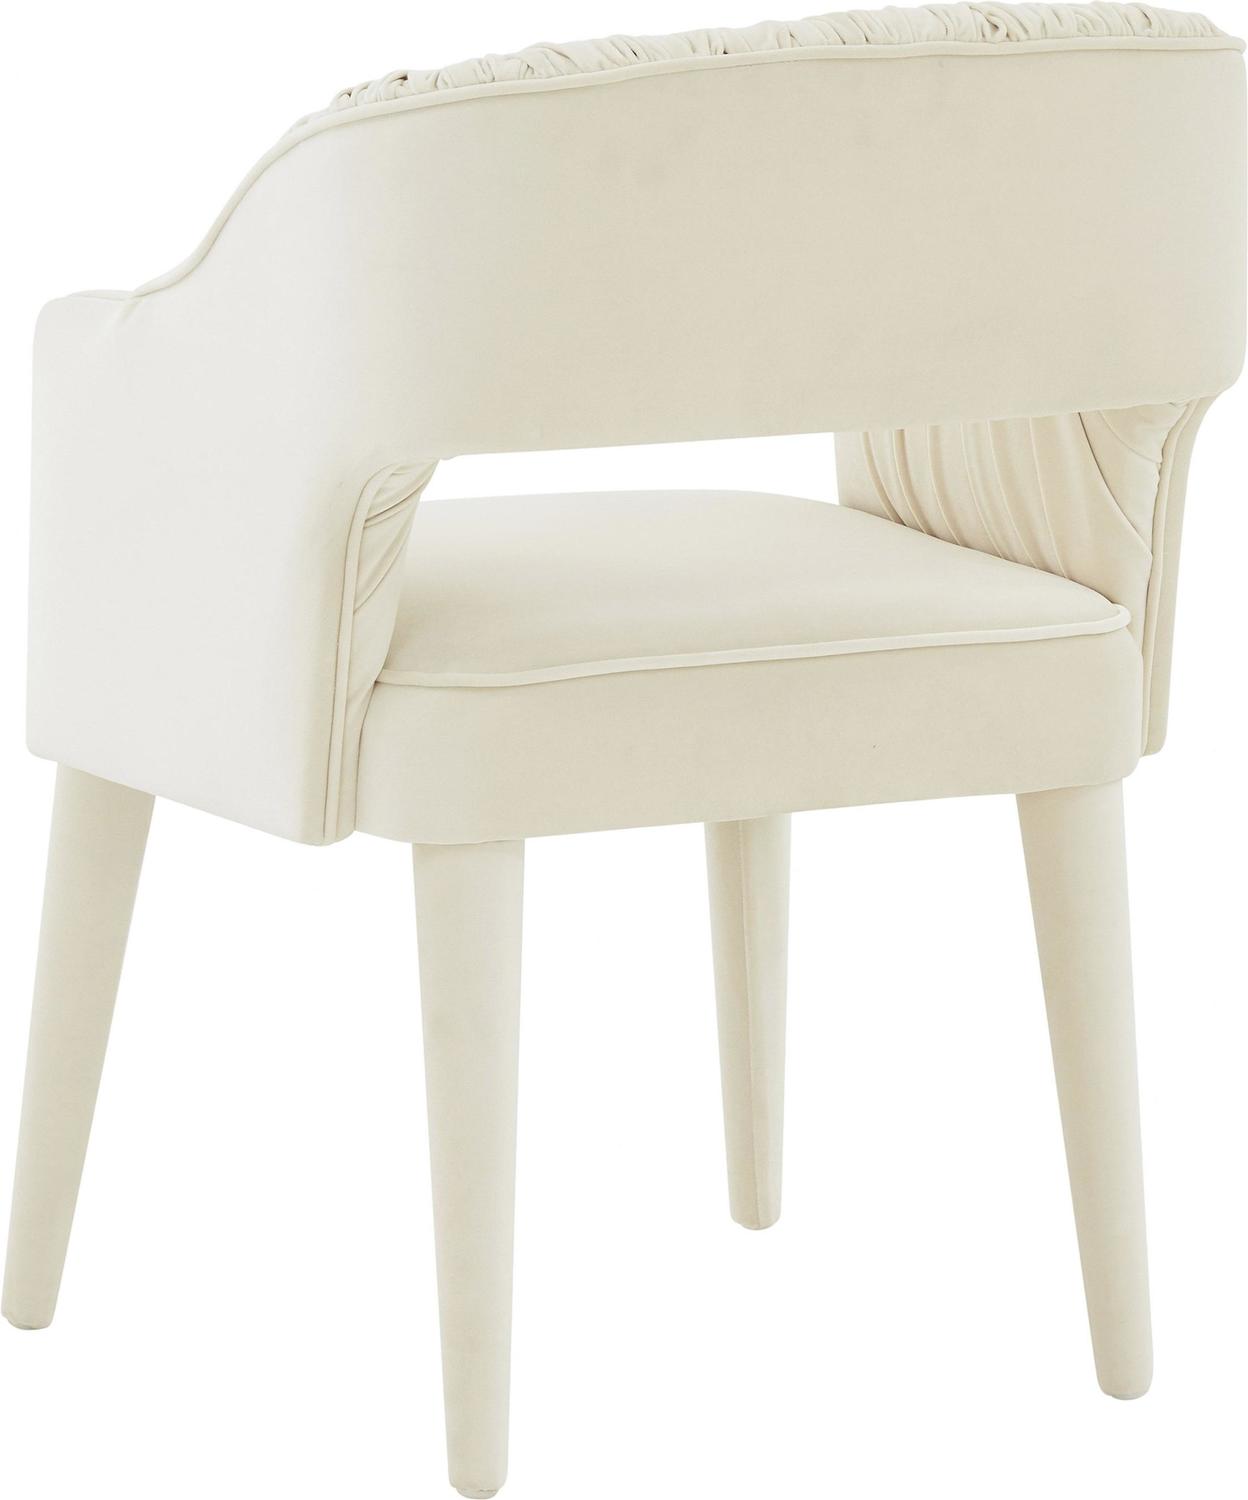 dining room stool Contemporary Design Furniture Dining Chairs Cream